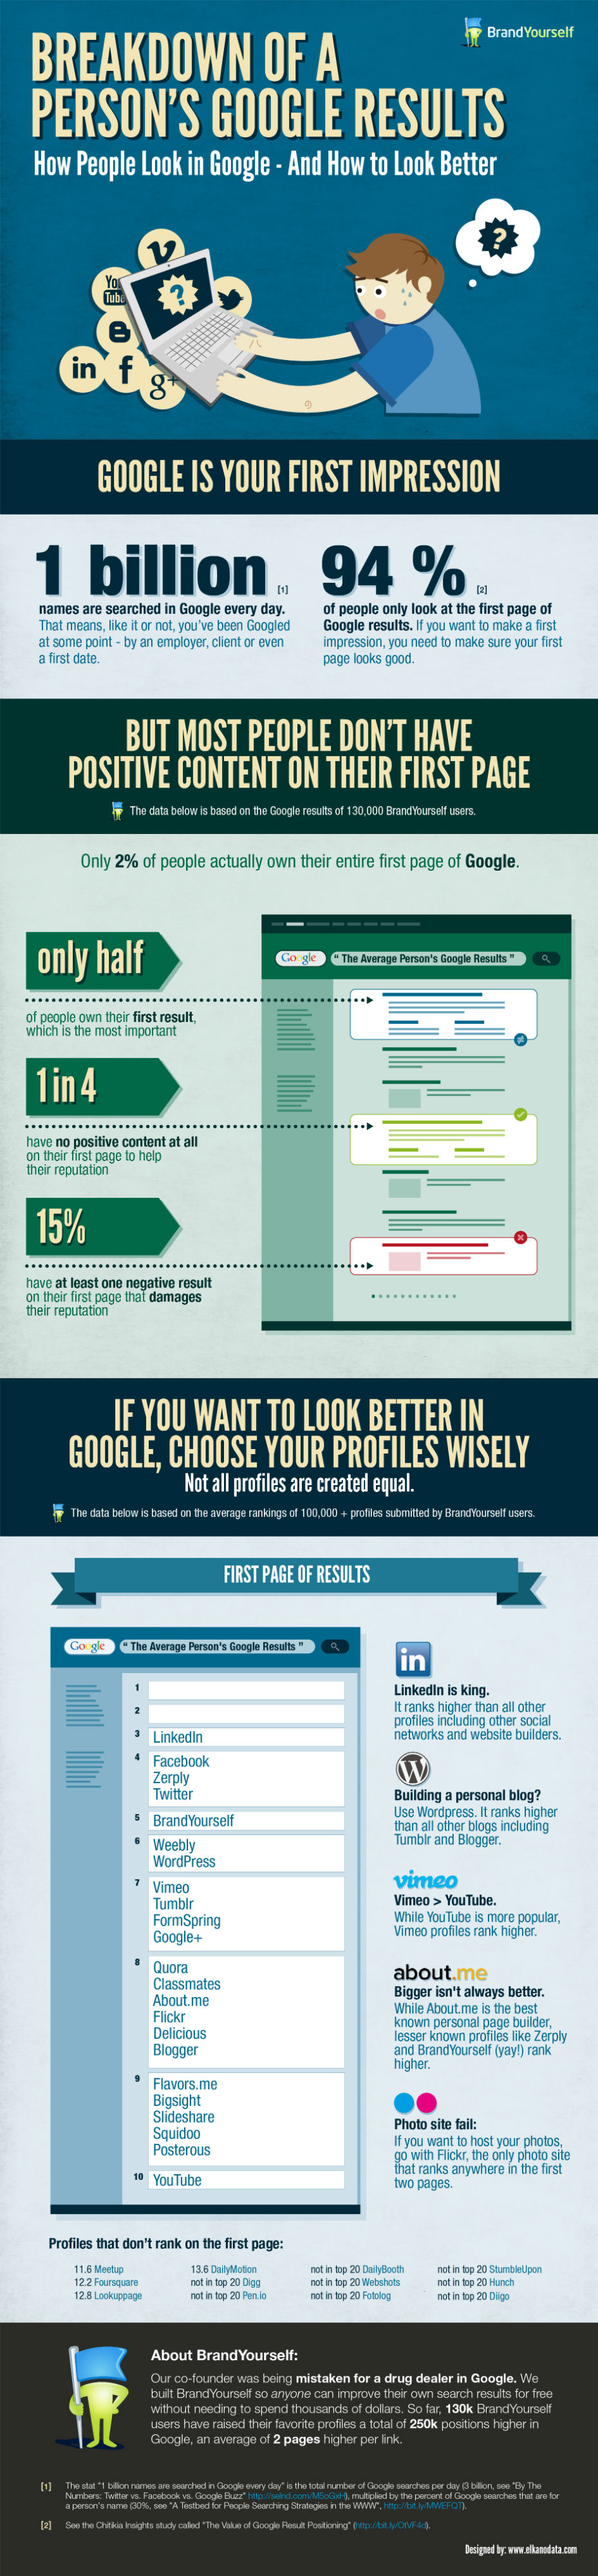 How to Appear Higher on Google Search Results